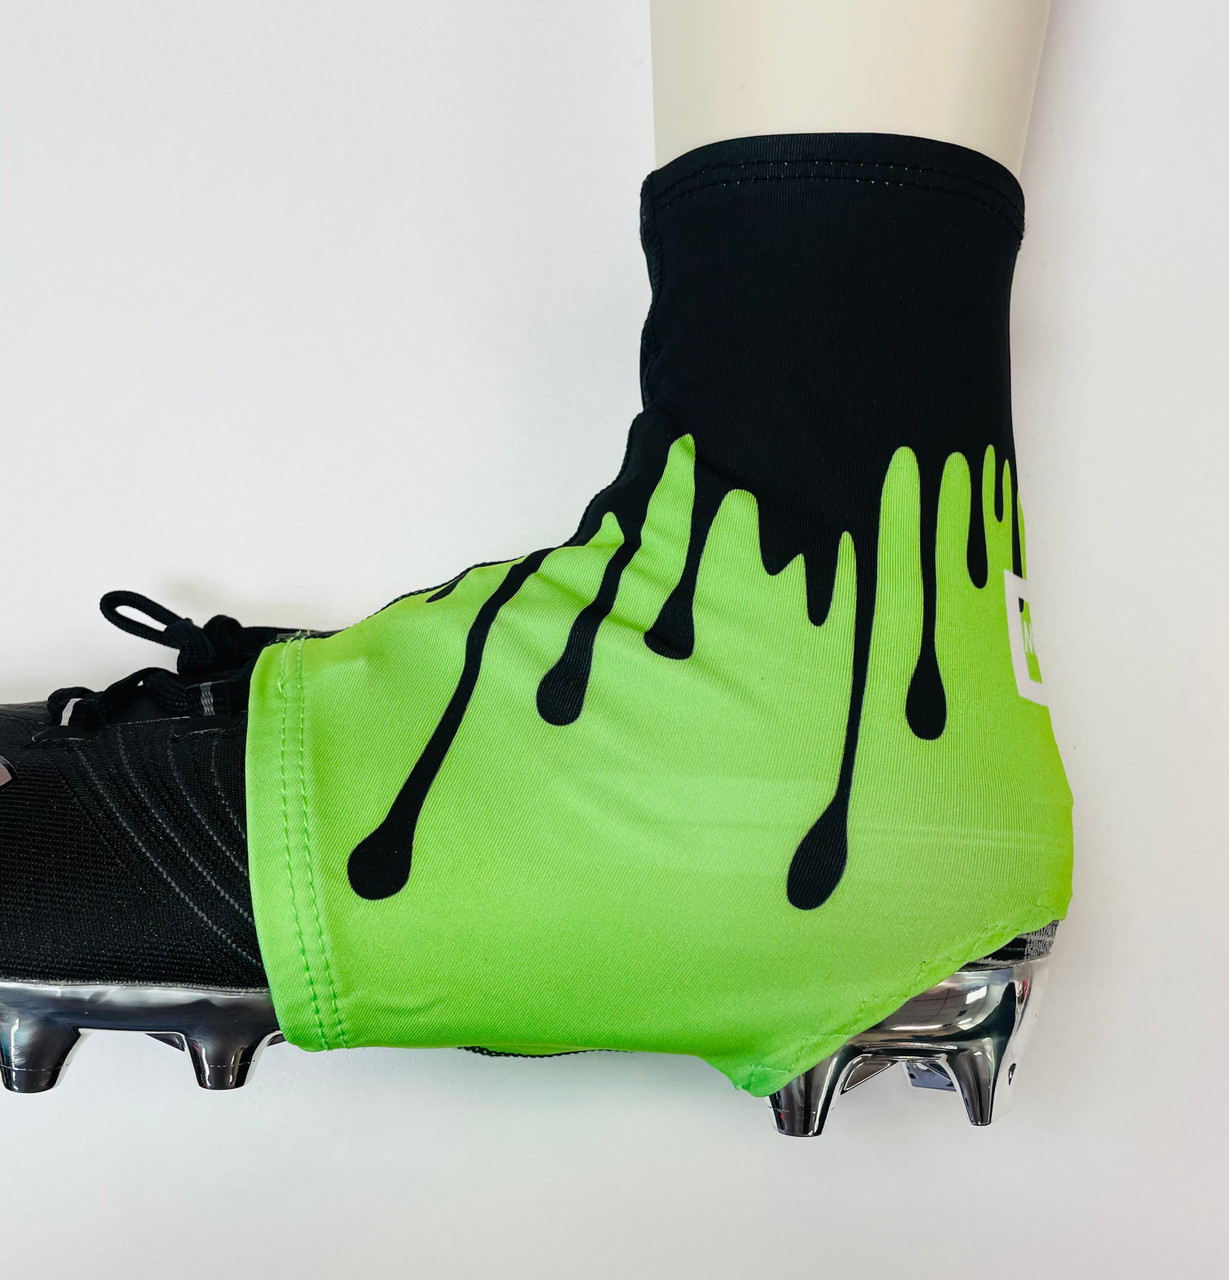 Drip Spats (cleat cover) black and neon green - Dmaxx Sports